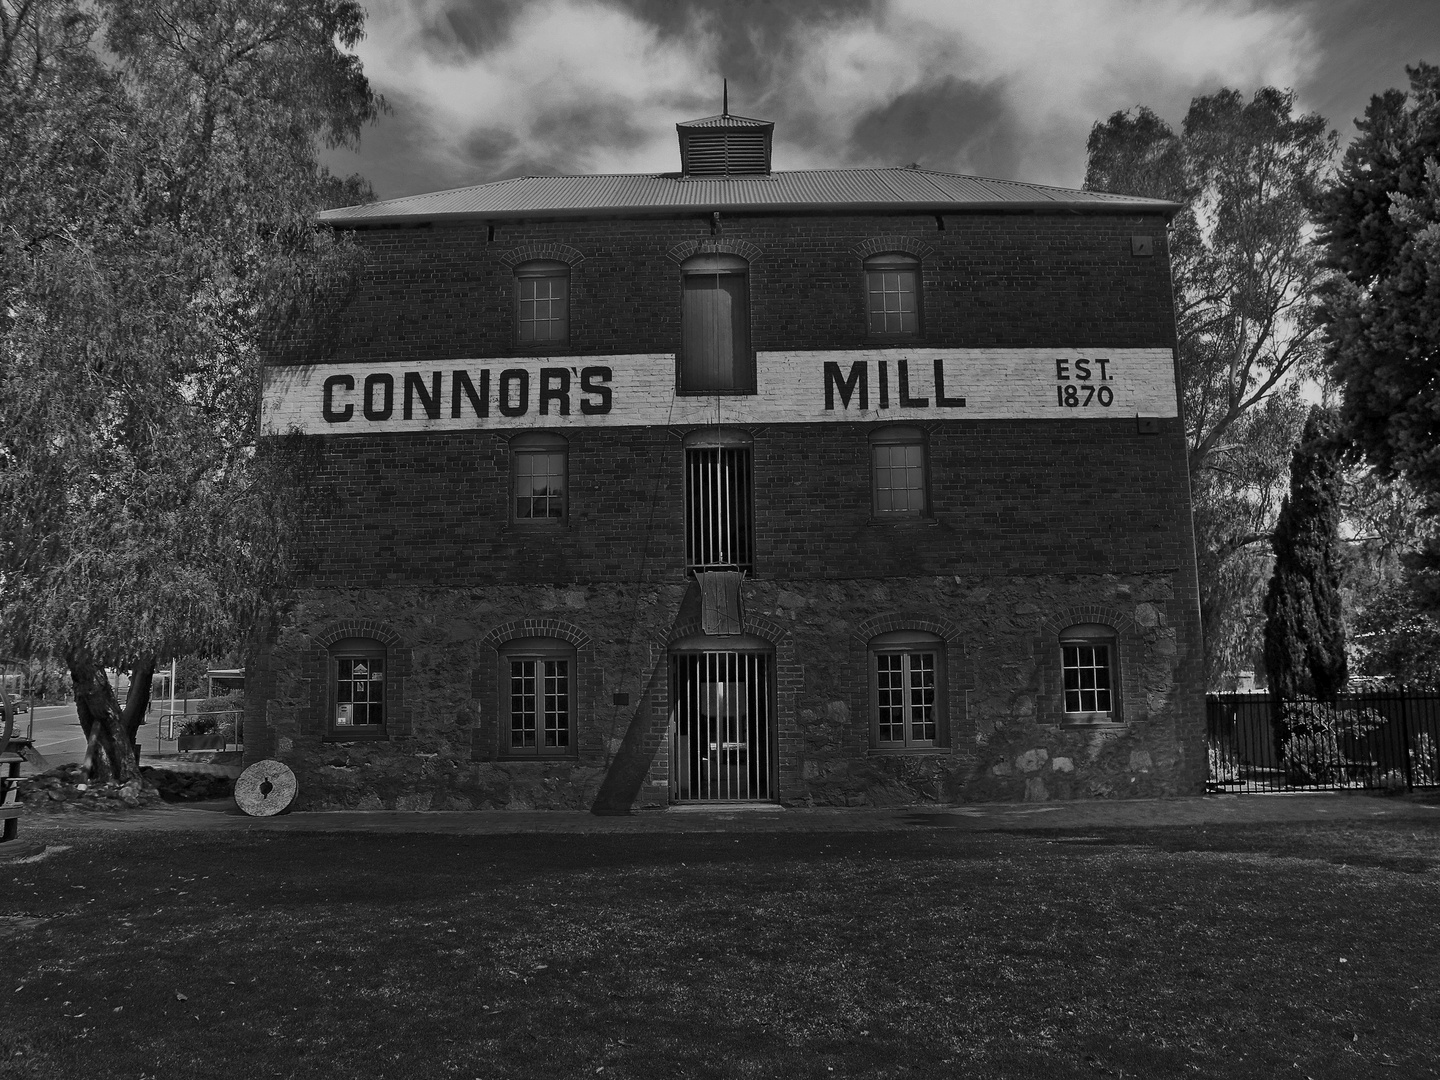 The "Connor's Mill" in Toodyay